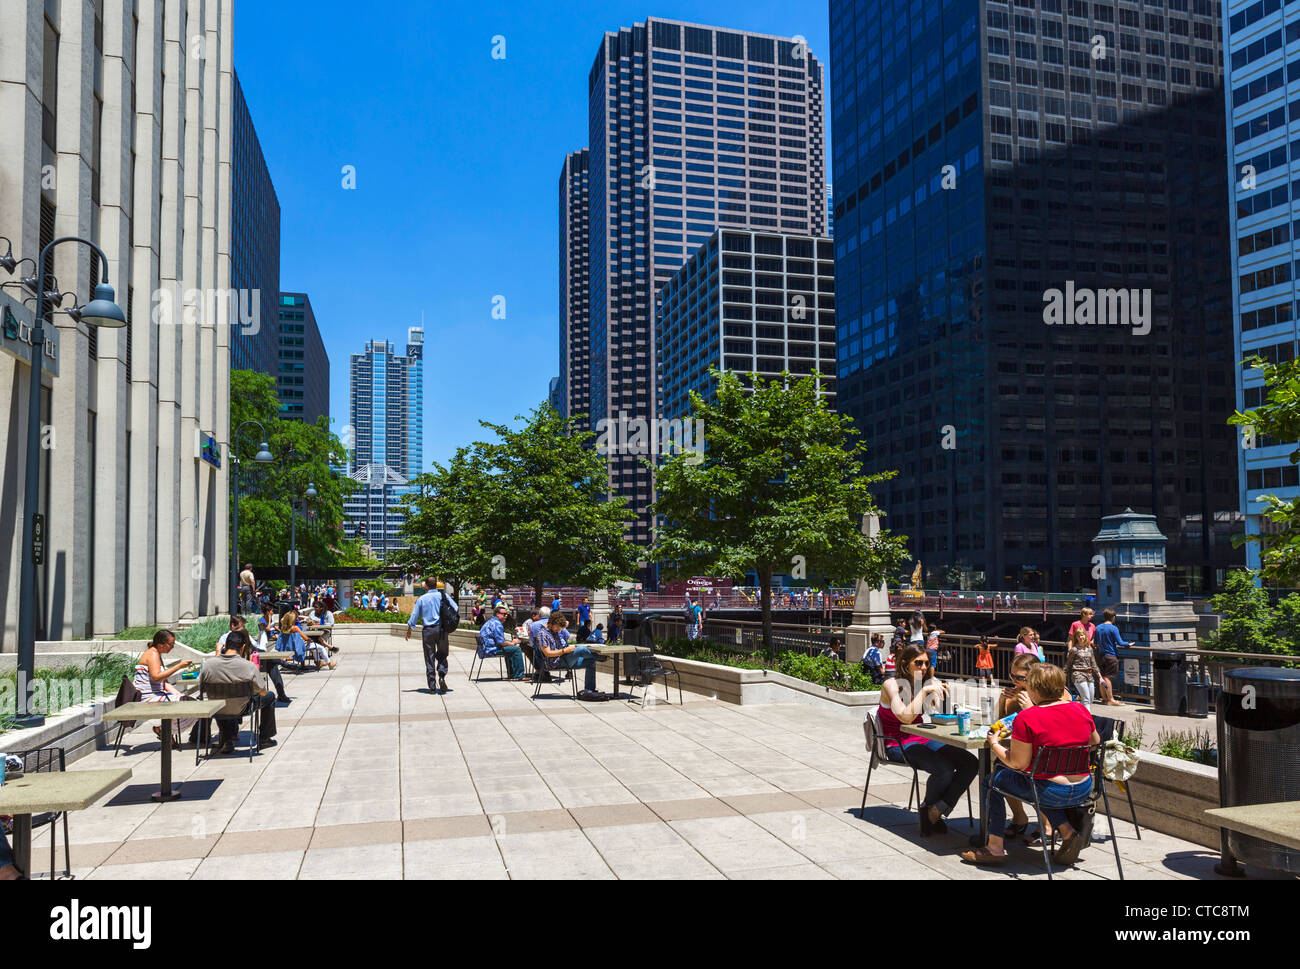 Office workers lunching on terrace of Caribou cafe outside Adams St entrance to Union Station, Chicago River, South Riverside Plaza, Chicago, IL, USA Stock Photo